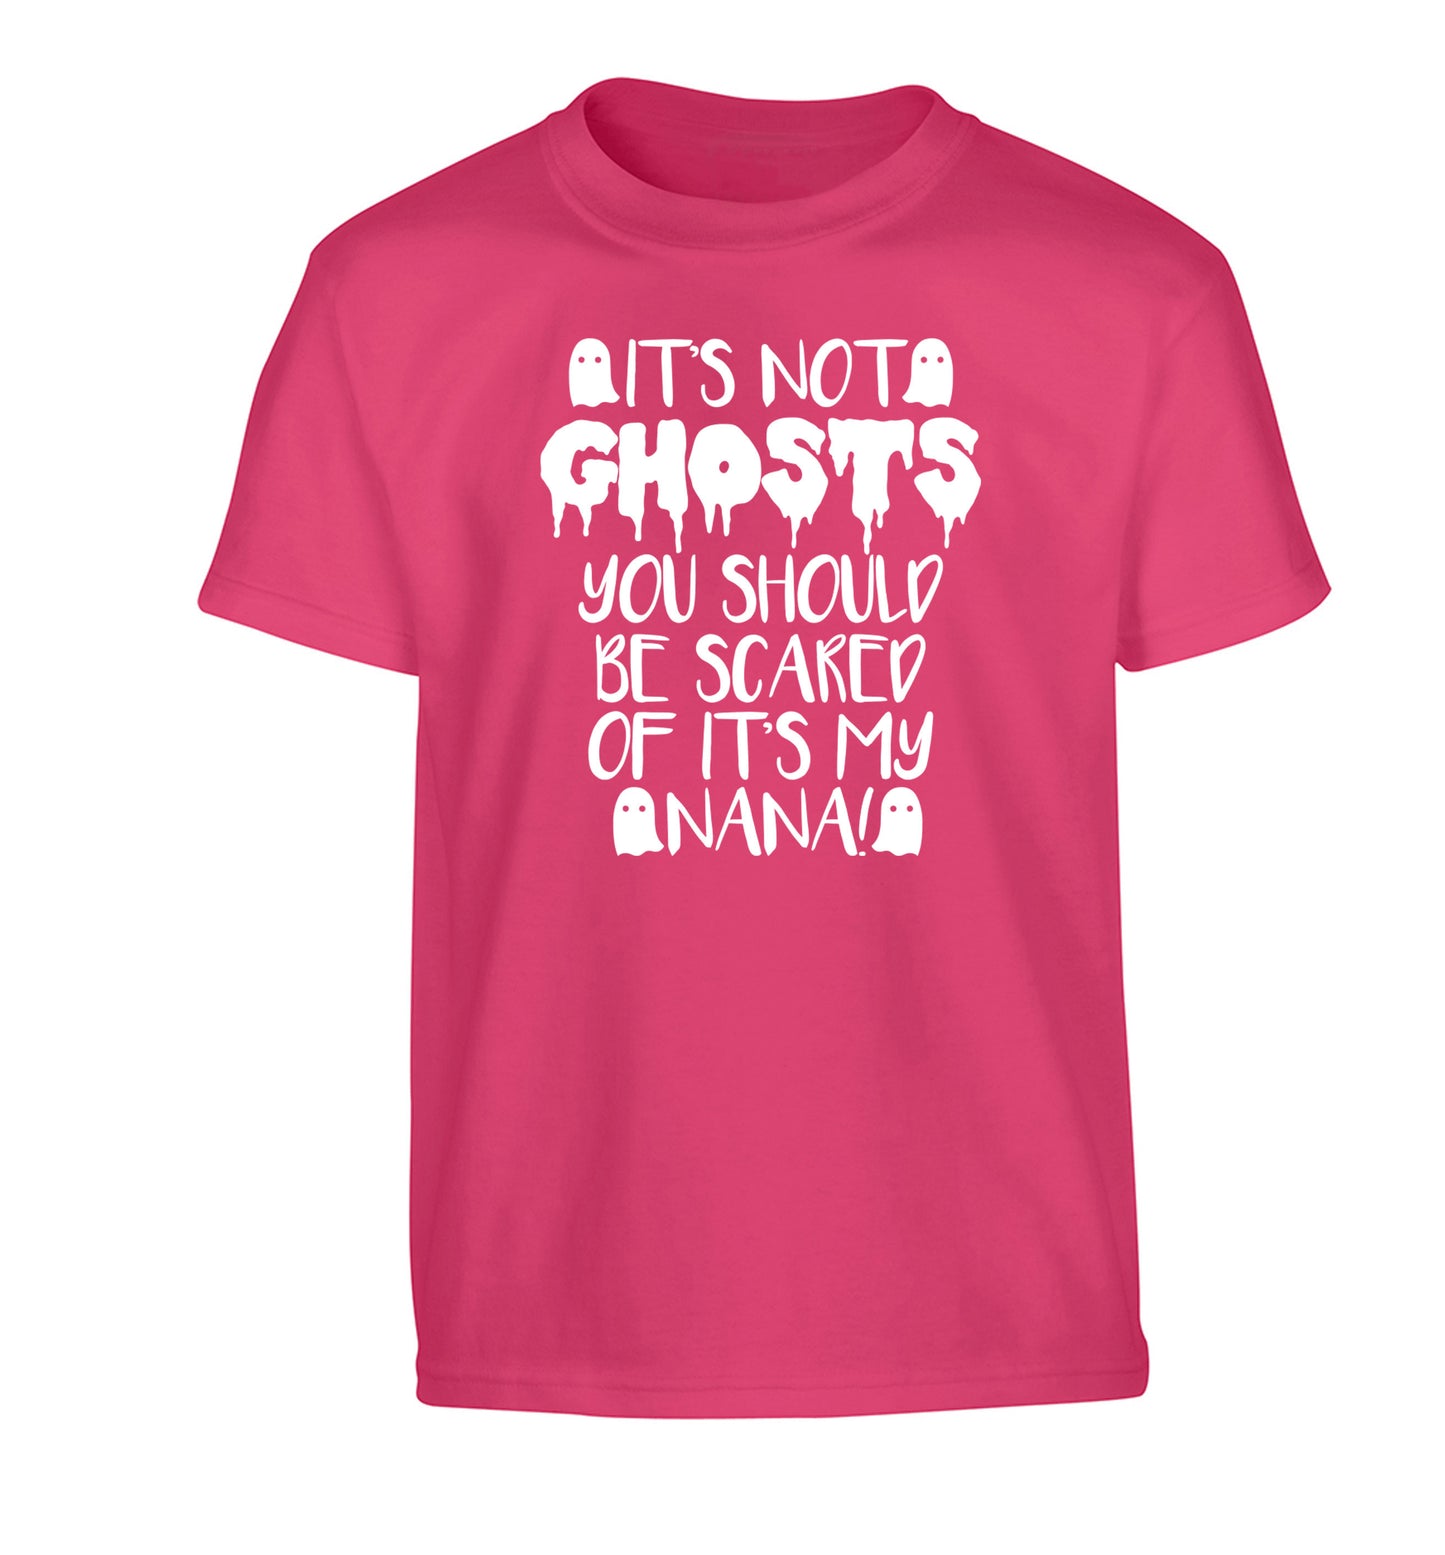 It's not ghosts you should be scared of it's my nana! Children's pink Tshirt 12-14 Years